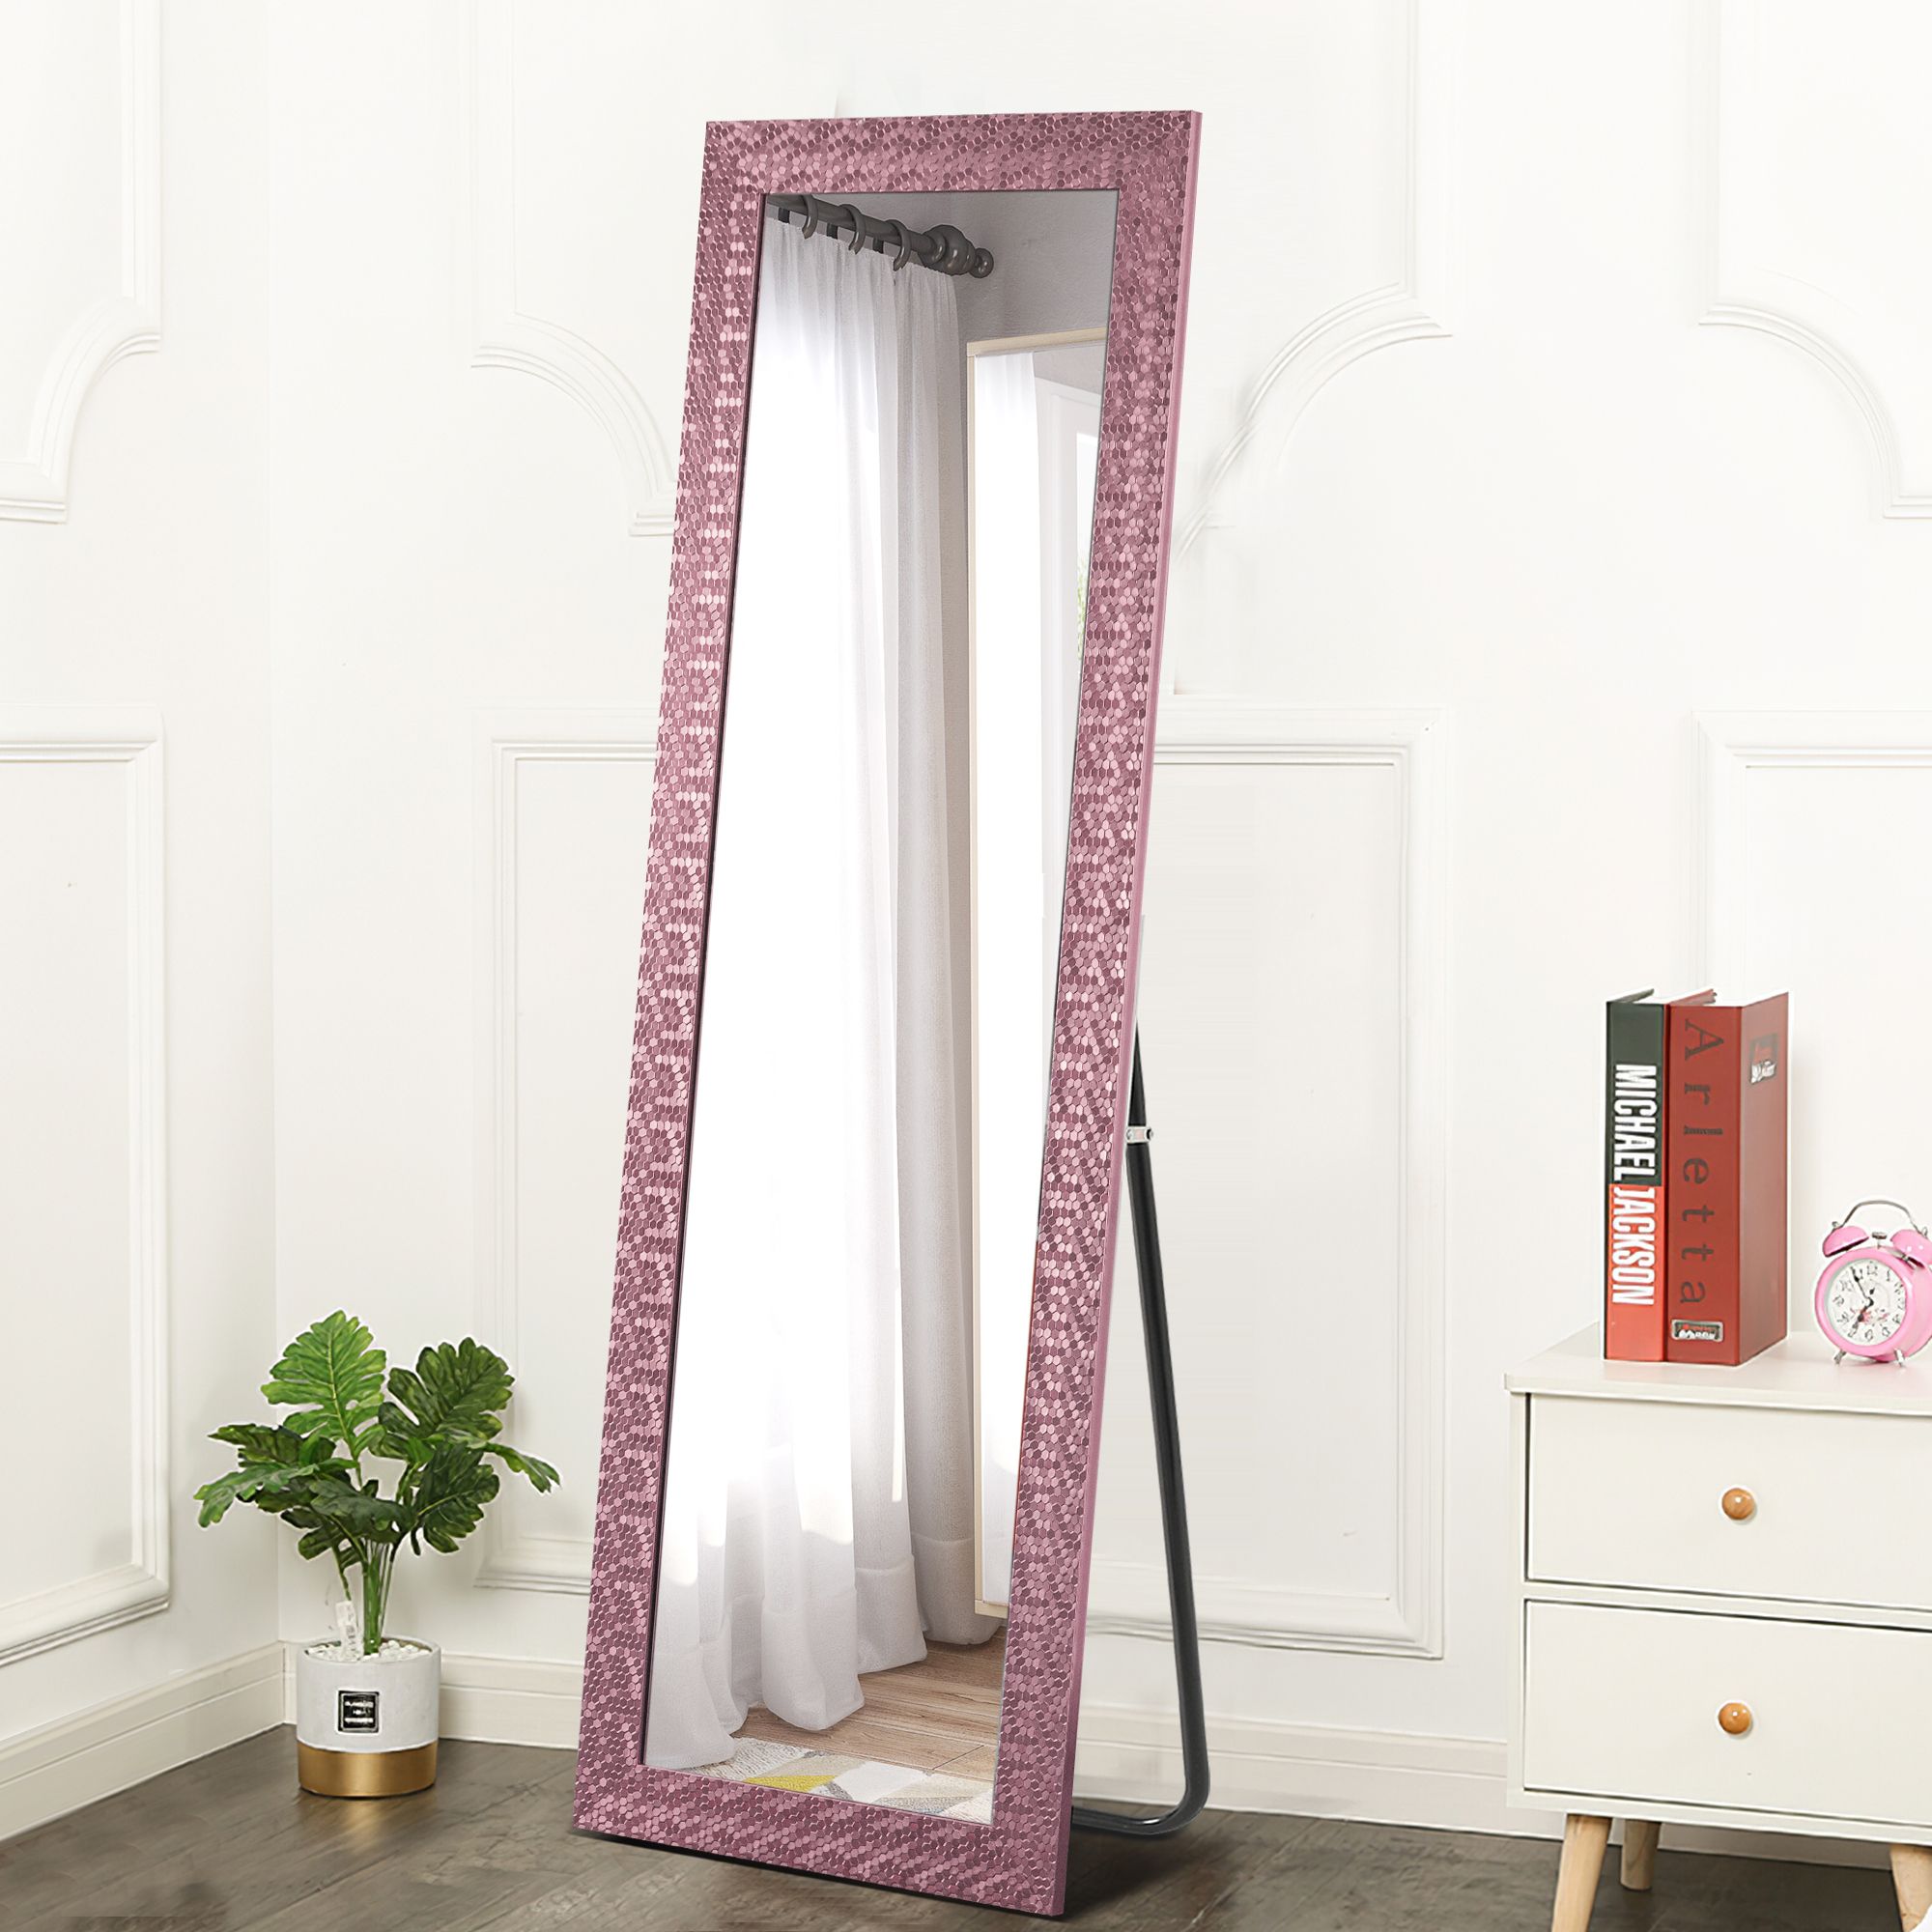 Neutype Full Length Mirror Decor Wall Mounted Mirror Floor Mirror With Within Mahogany Full Length Mirrors (View 9 of 15)